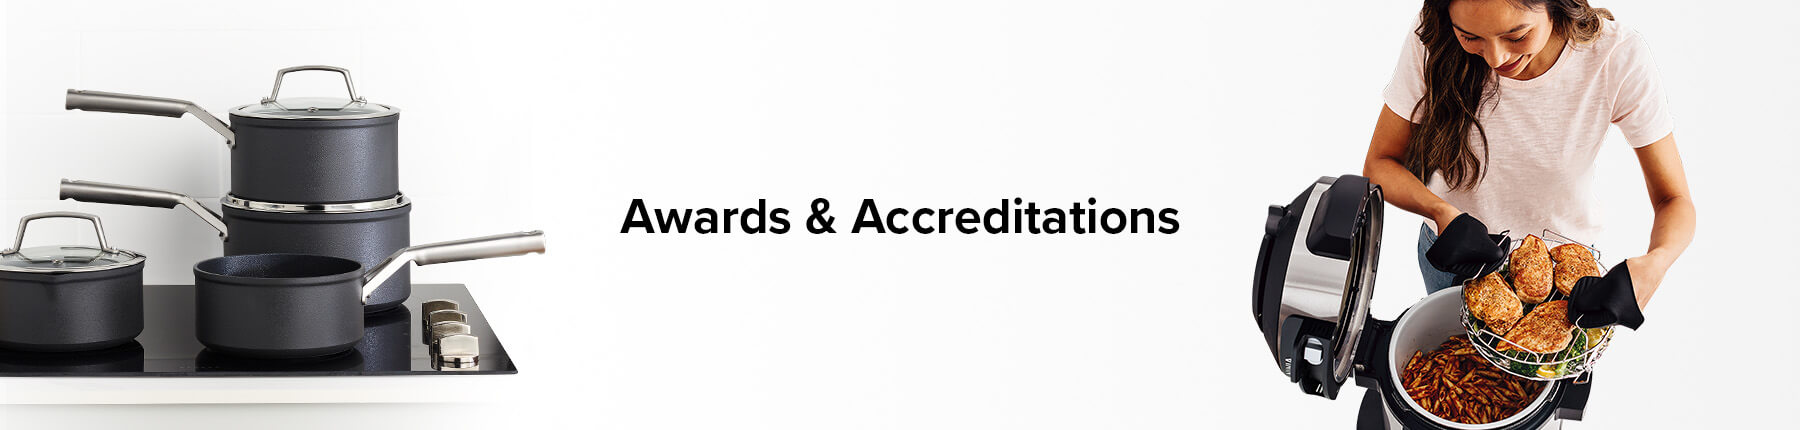 Ninja's awarded and accredited products